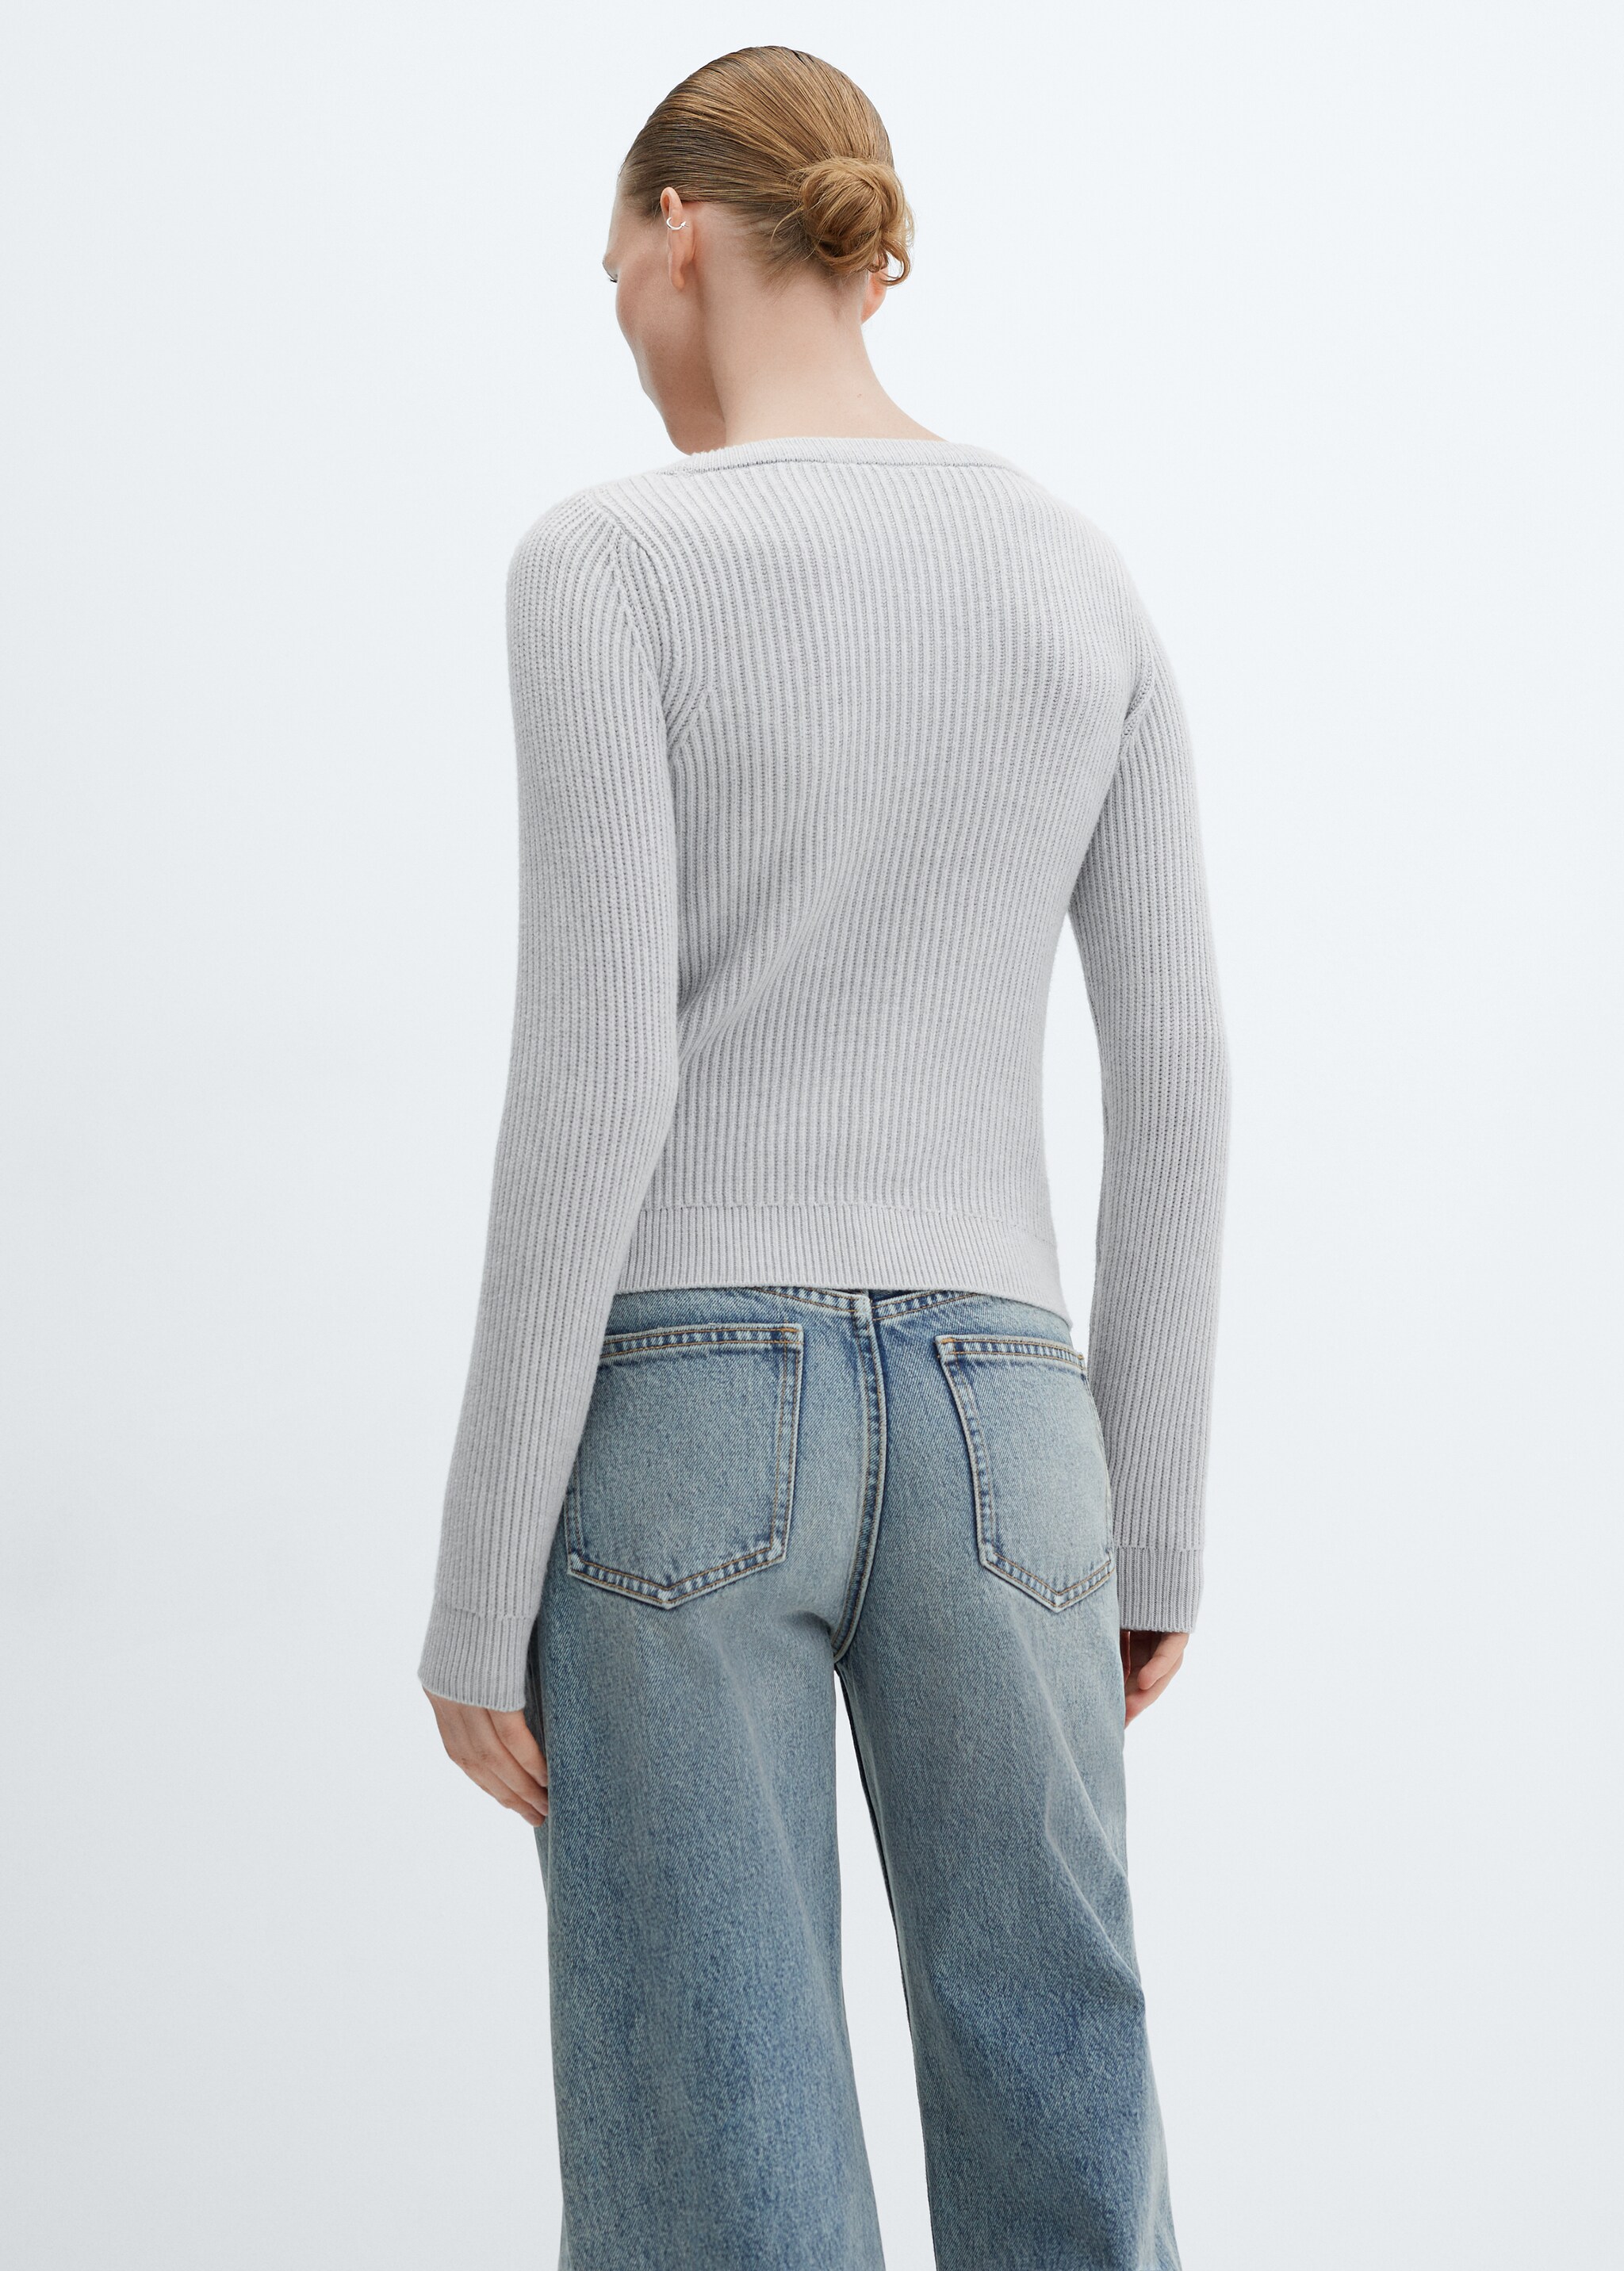 Low-cut neck sweater - Reverse of the article